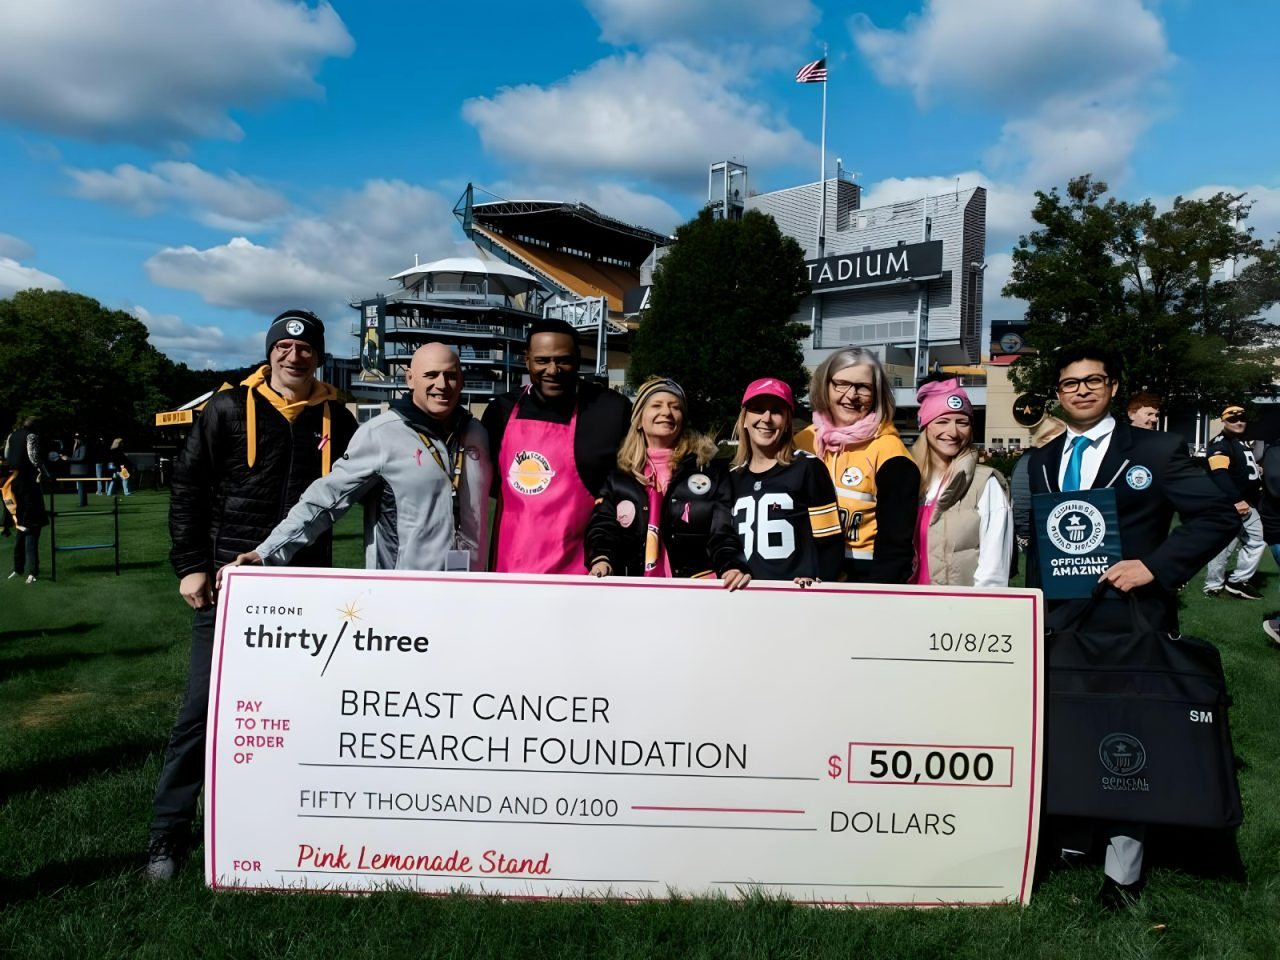 A new Guinness World Record for the most money raised at a lemonade stand in 24 hours.- The Breast Cancer Research Foundation